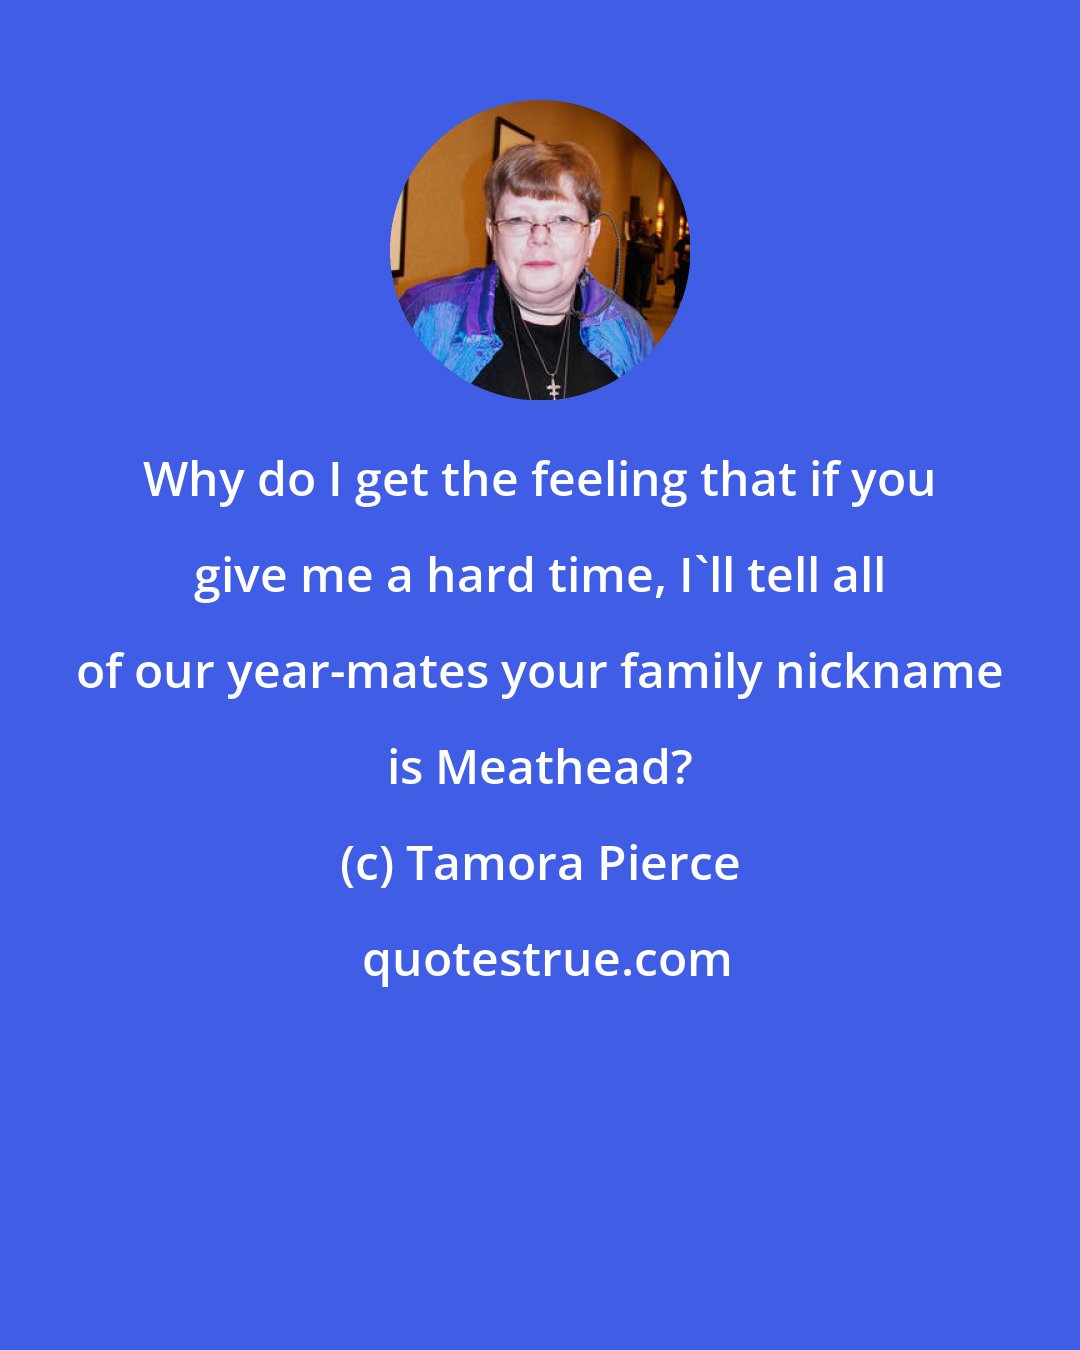 Tamora Pierce: Why do I get the feeling that if you give me a hard time, I'll tell all of our year-mates your family nickname is Meathead?